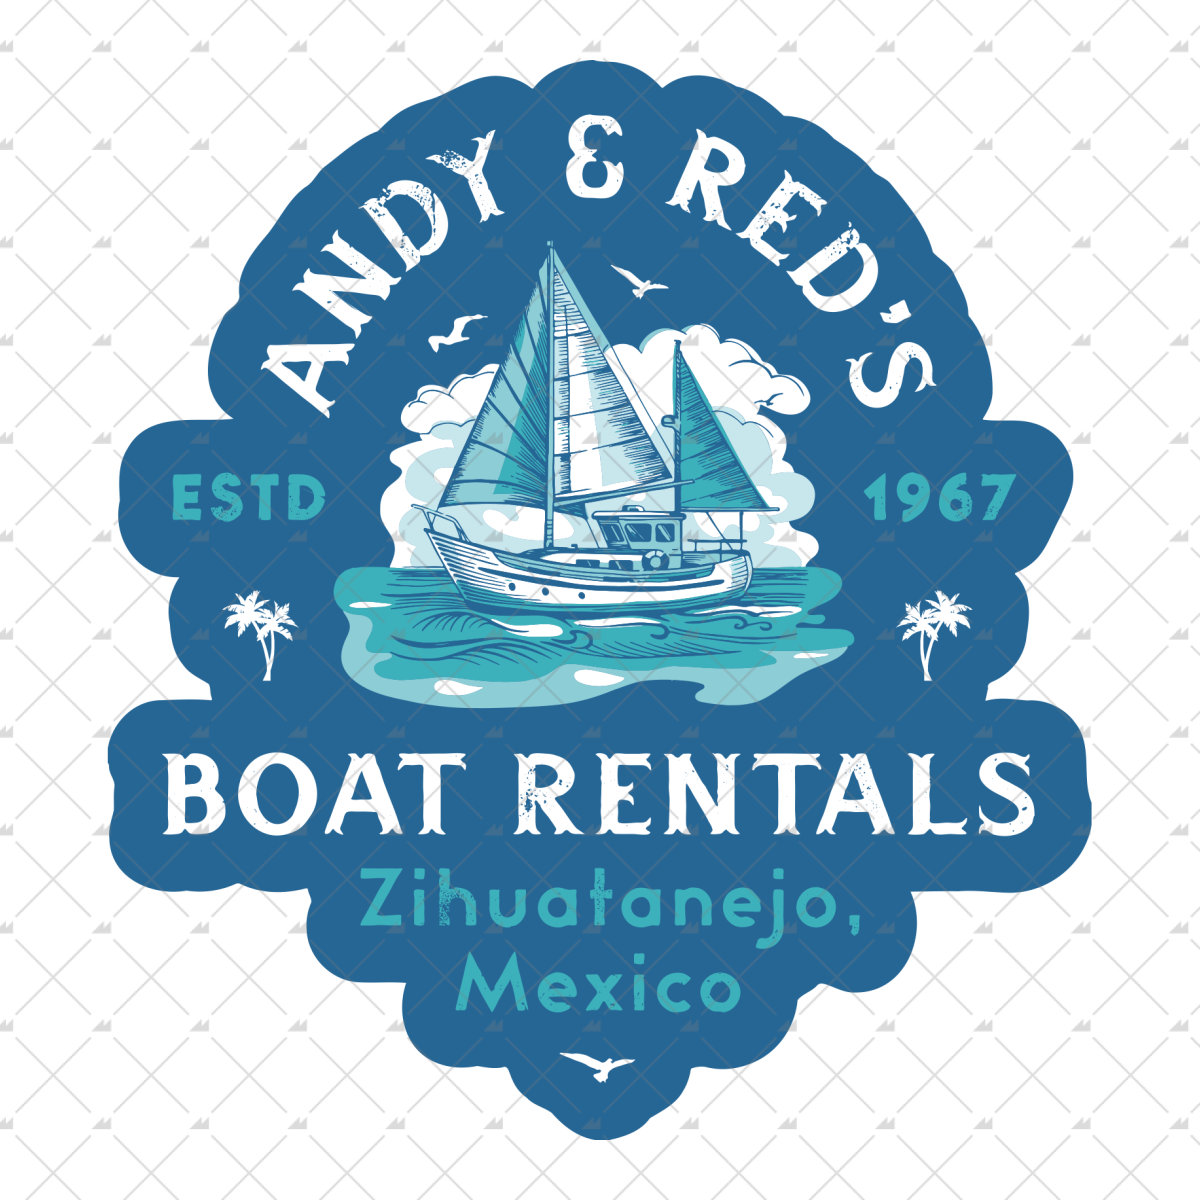 Andy & Red's Boat Rentals - Sticker